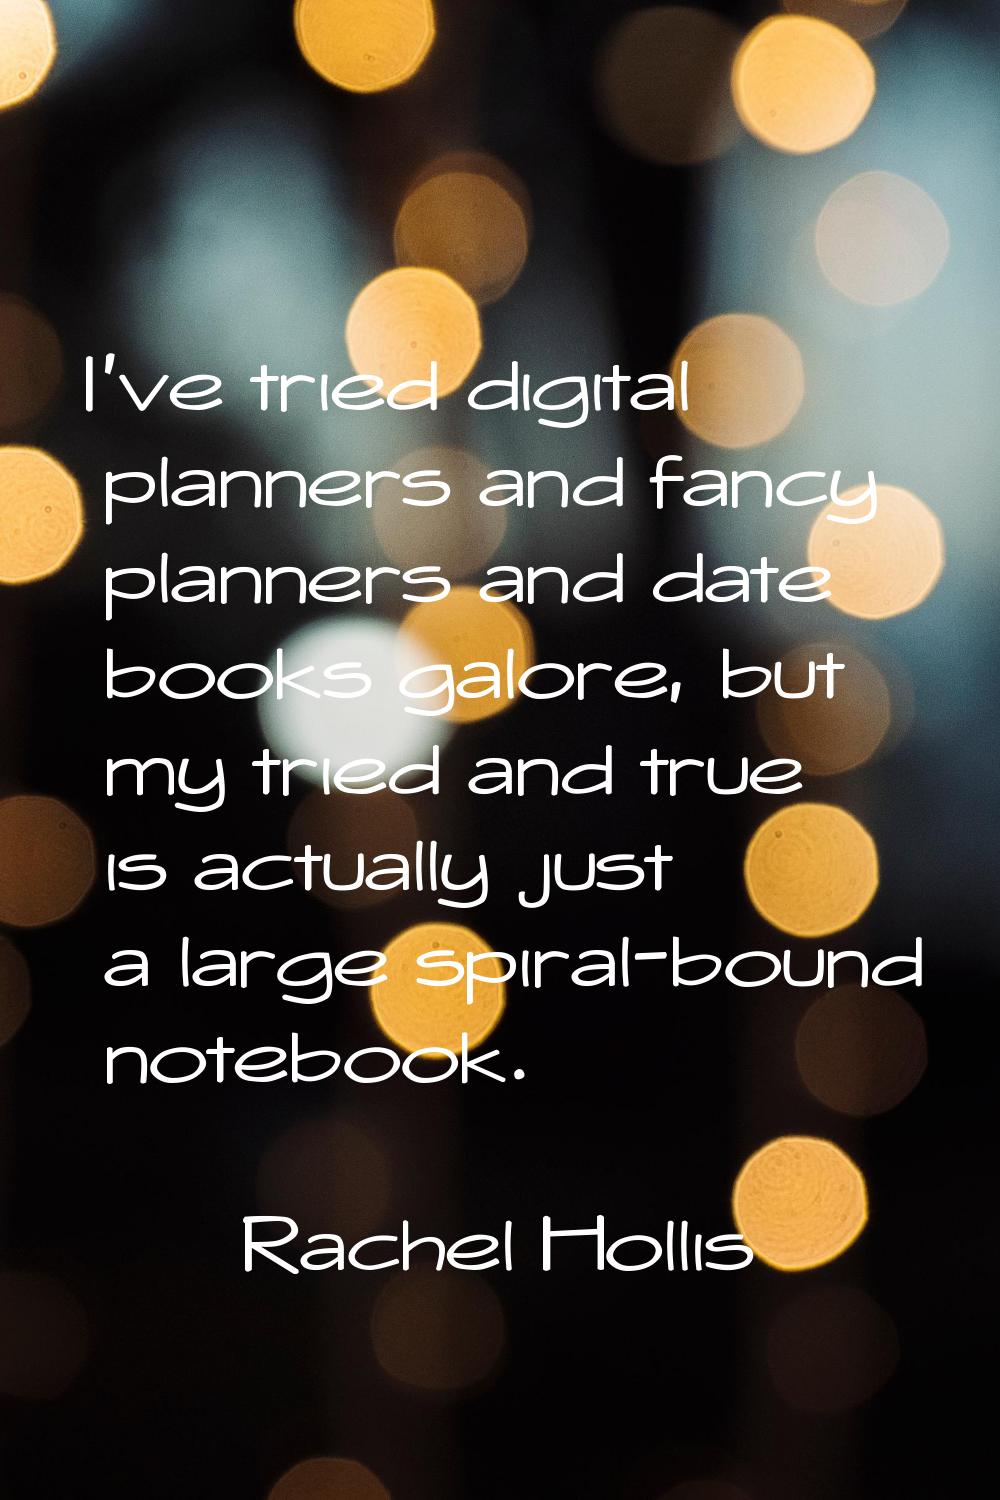 I've tried digital planners and fancy planners and date books galore, but my tried and true is actu